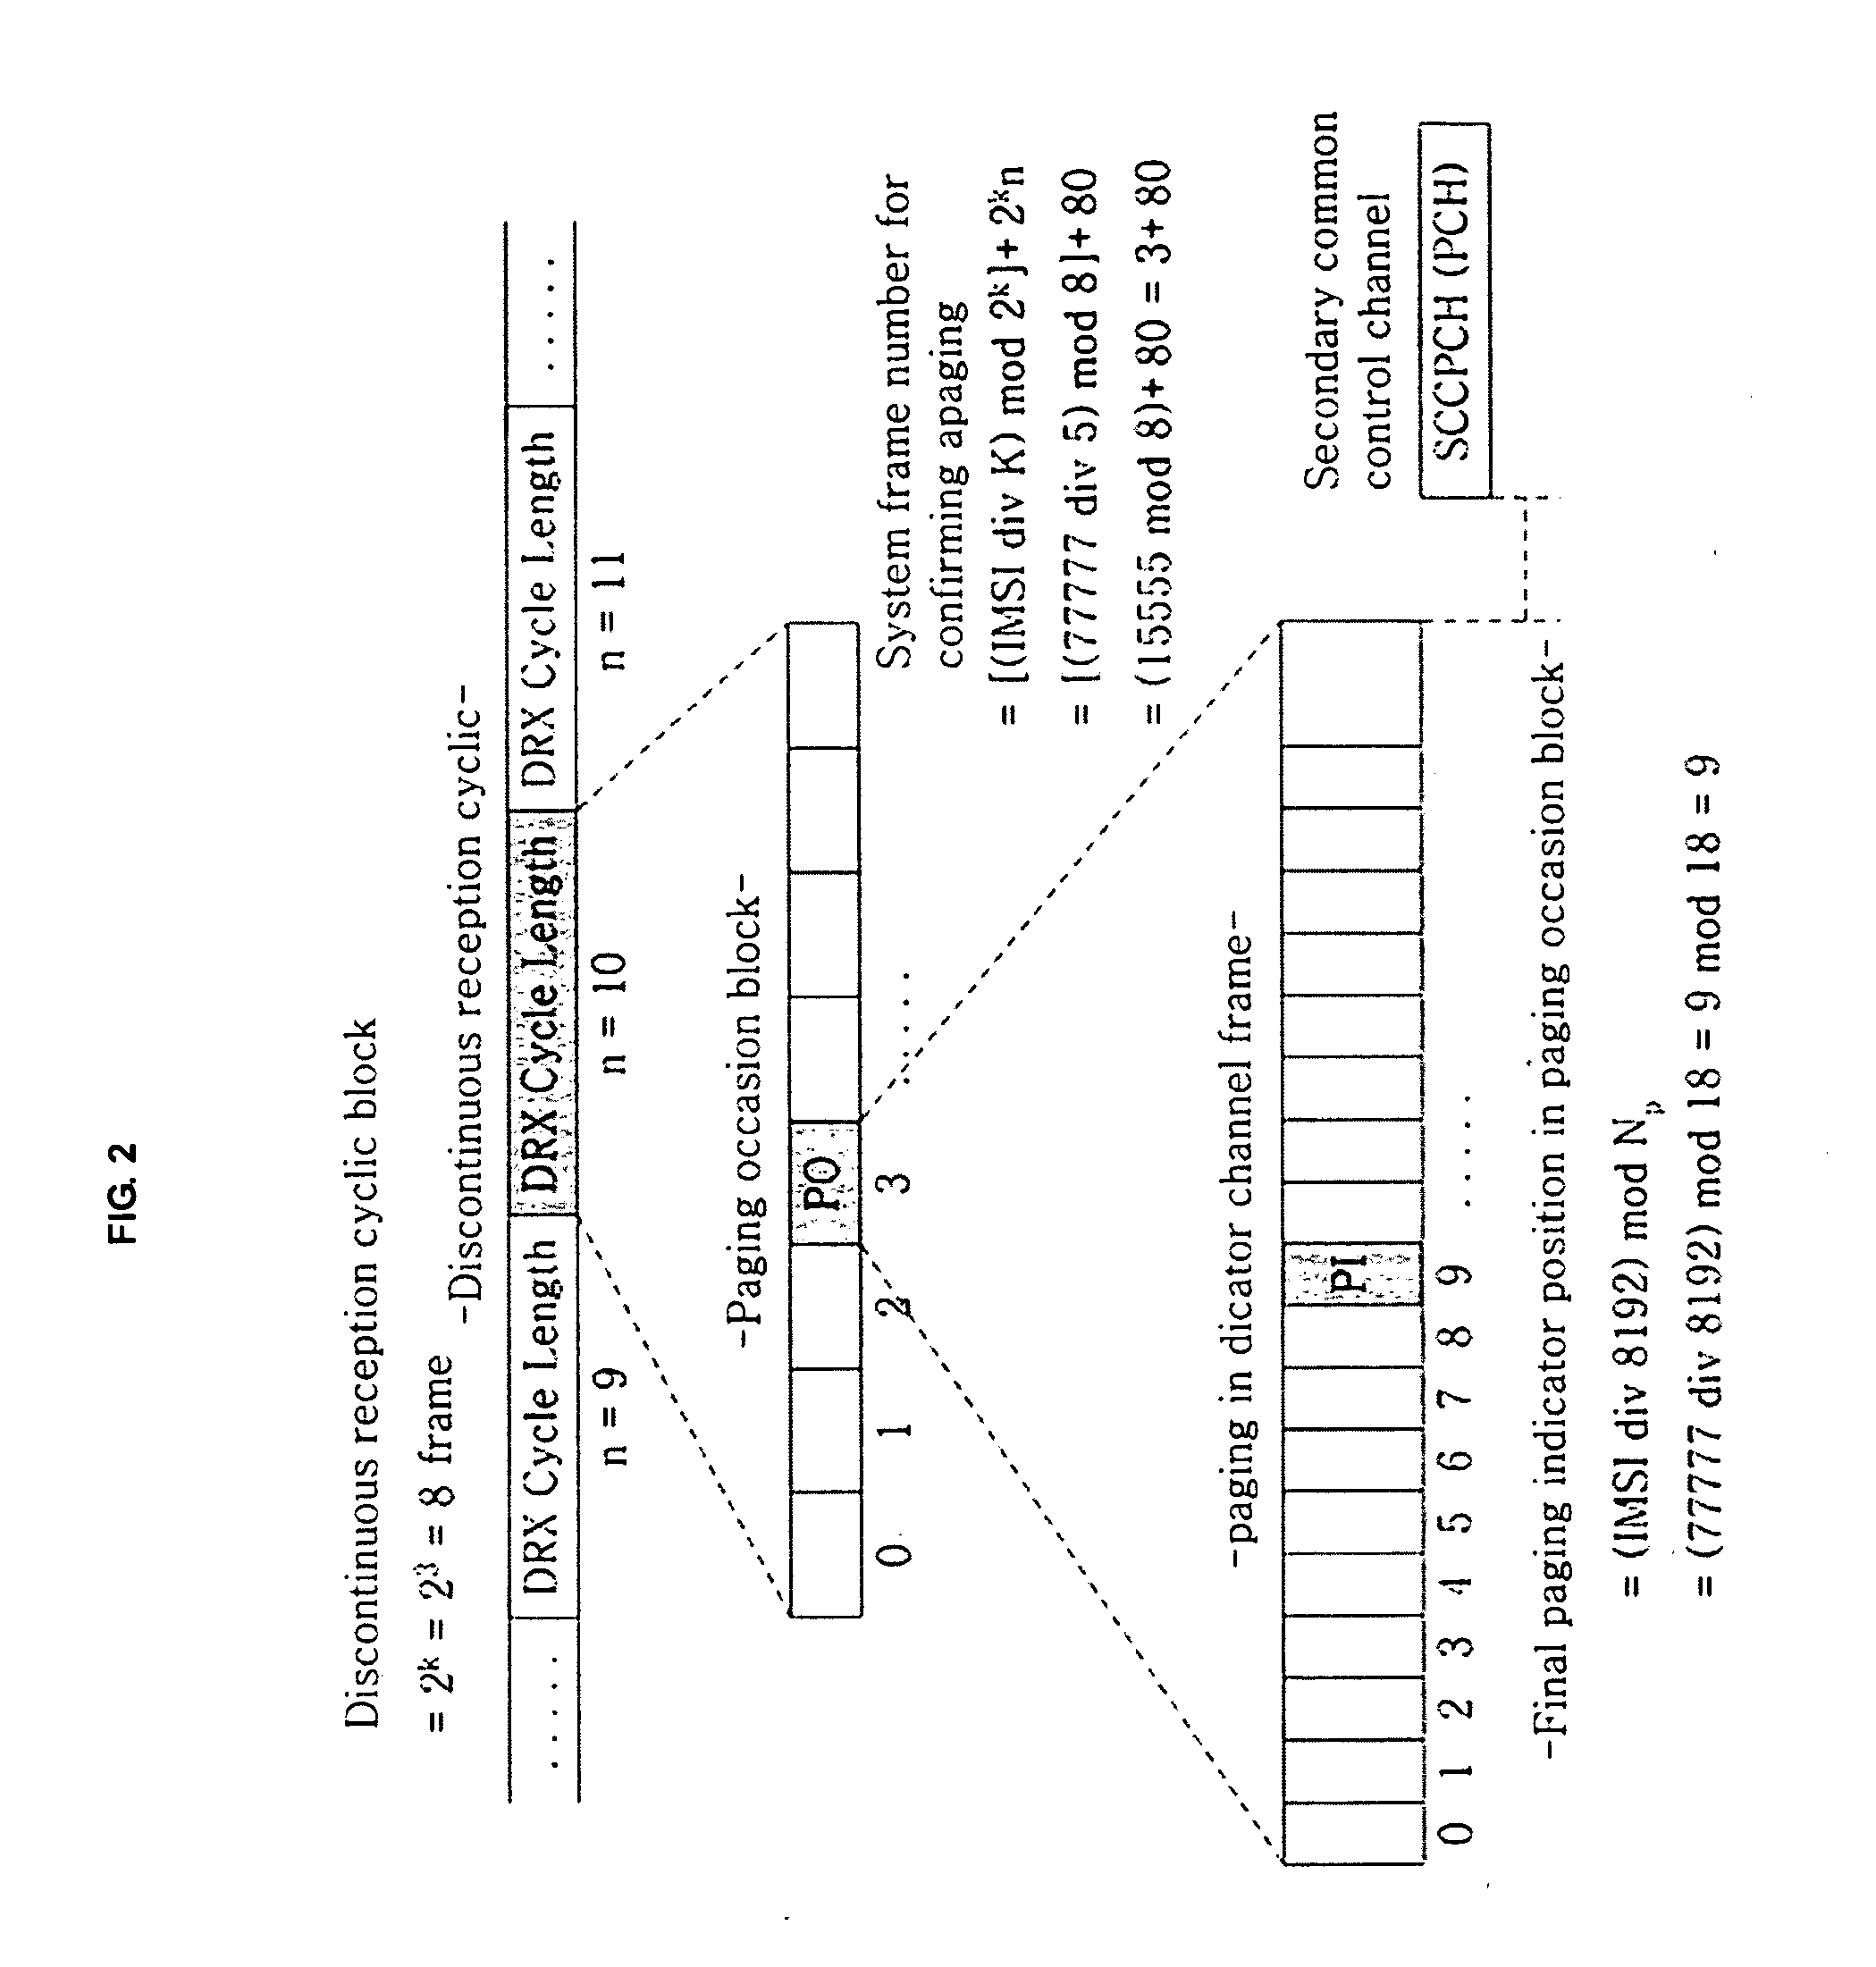 Method for Adaptive Discontinuous Reception Based On Extented Paging Indicator for Improvement of Power Effective Performance at Mobile Terminal on WCDMA